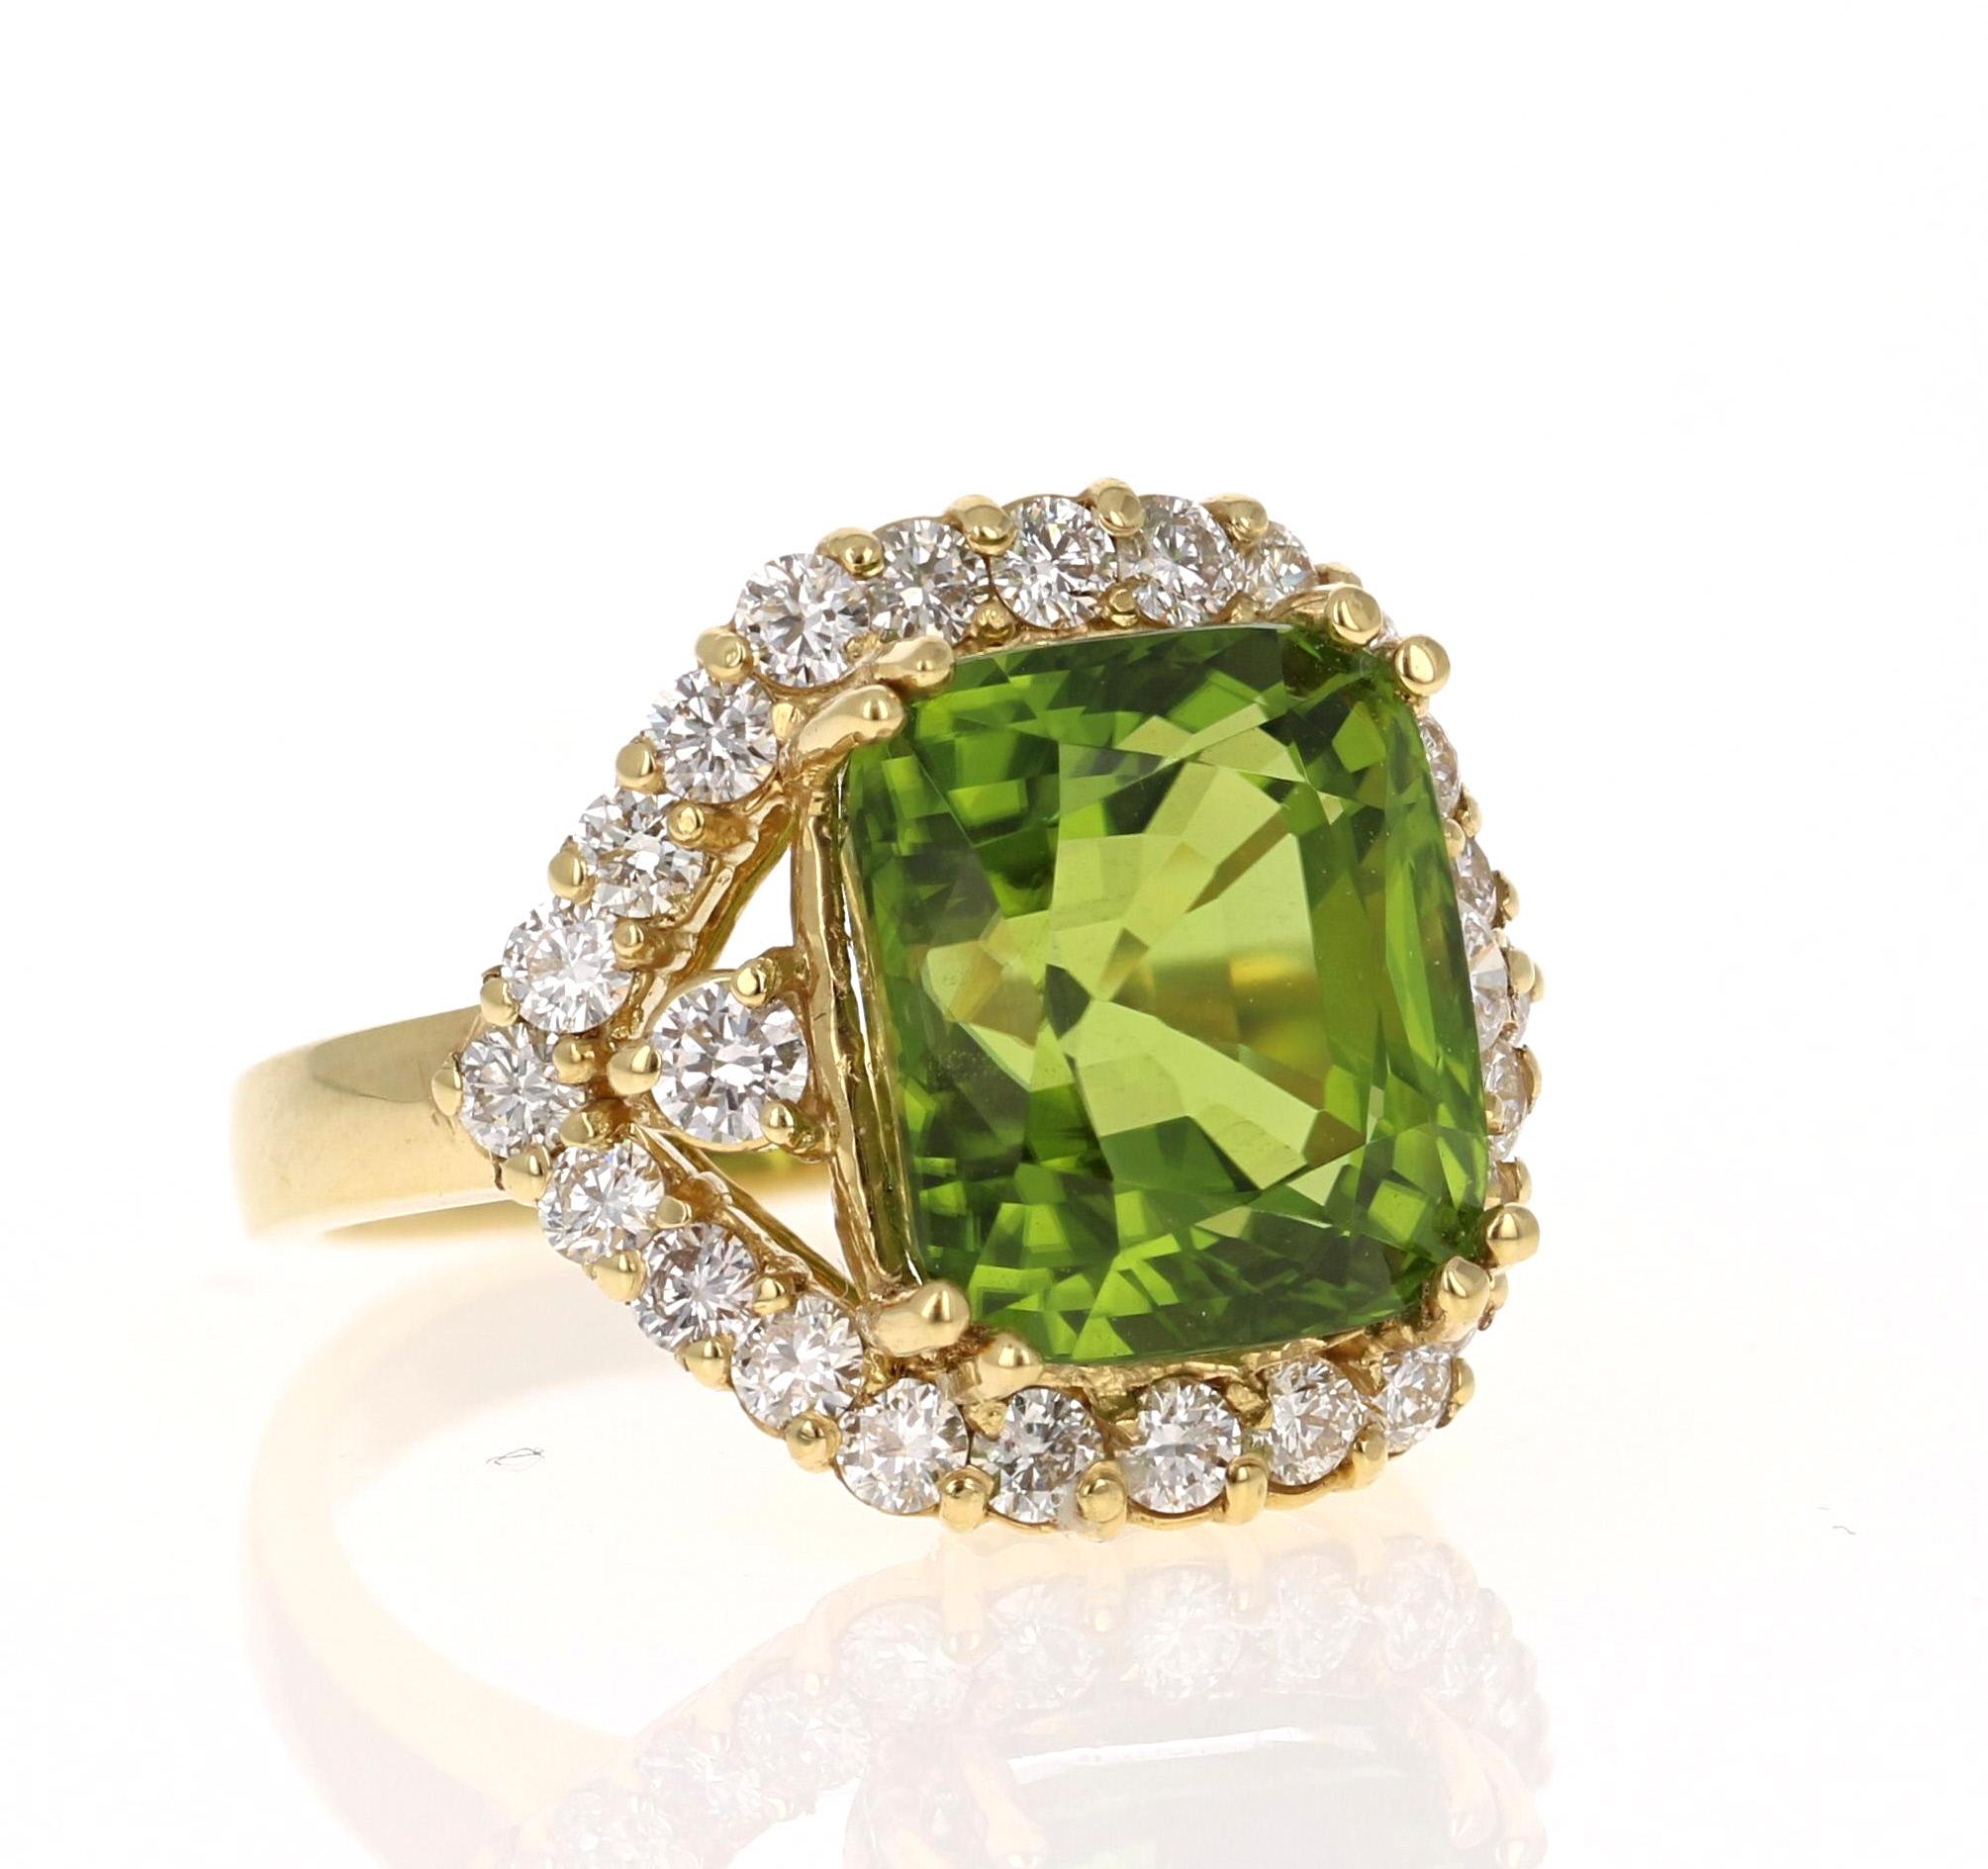 Bright, Beautiful and Bling! 

This Peridot and Diamond Ring has a stunning 10.12 Carat Cushion Cut Peridot and has 26 Round Cut Diamonds weighing 1.20 Carats. The Clarity and Color of the Diamonds is VS2 - H. The Total Carat Weight of the ring is